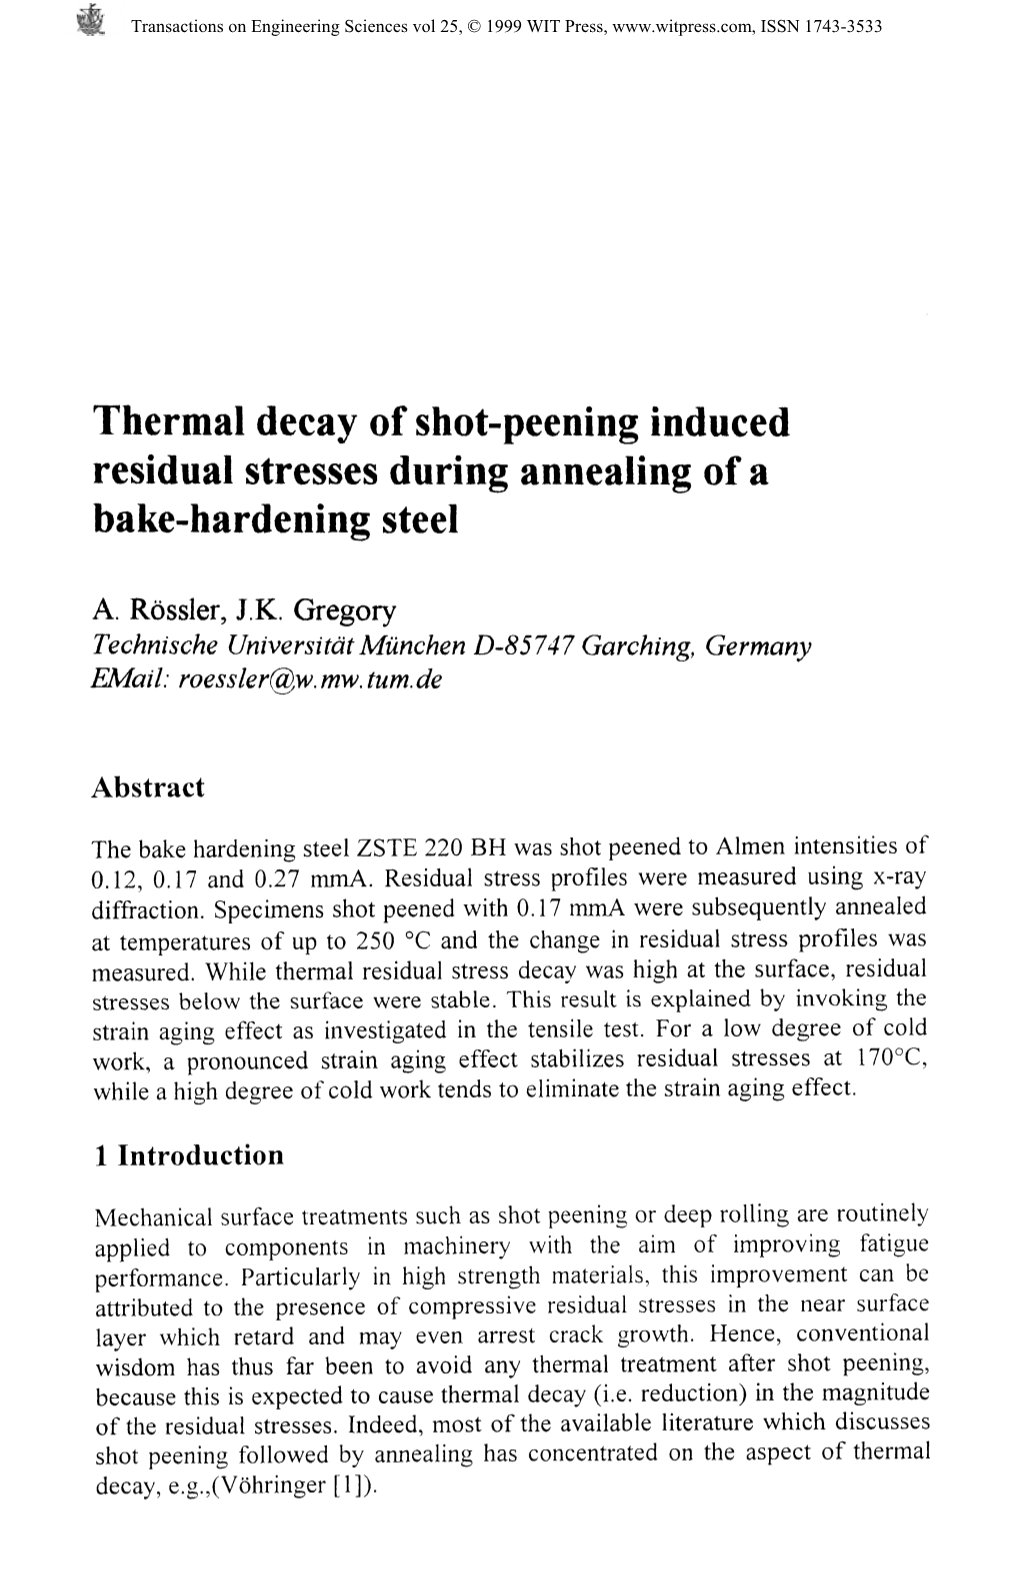 Thermal Decay of Shot-Peening Induced Residual Stresses During Annealing of a Bake-Hardening Steel